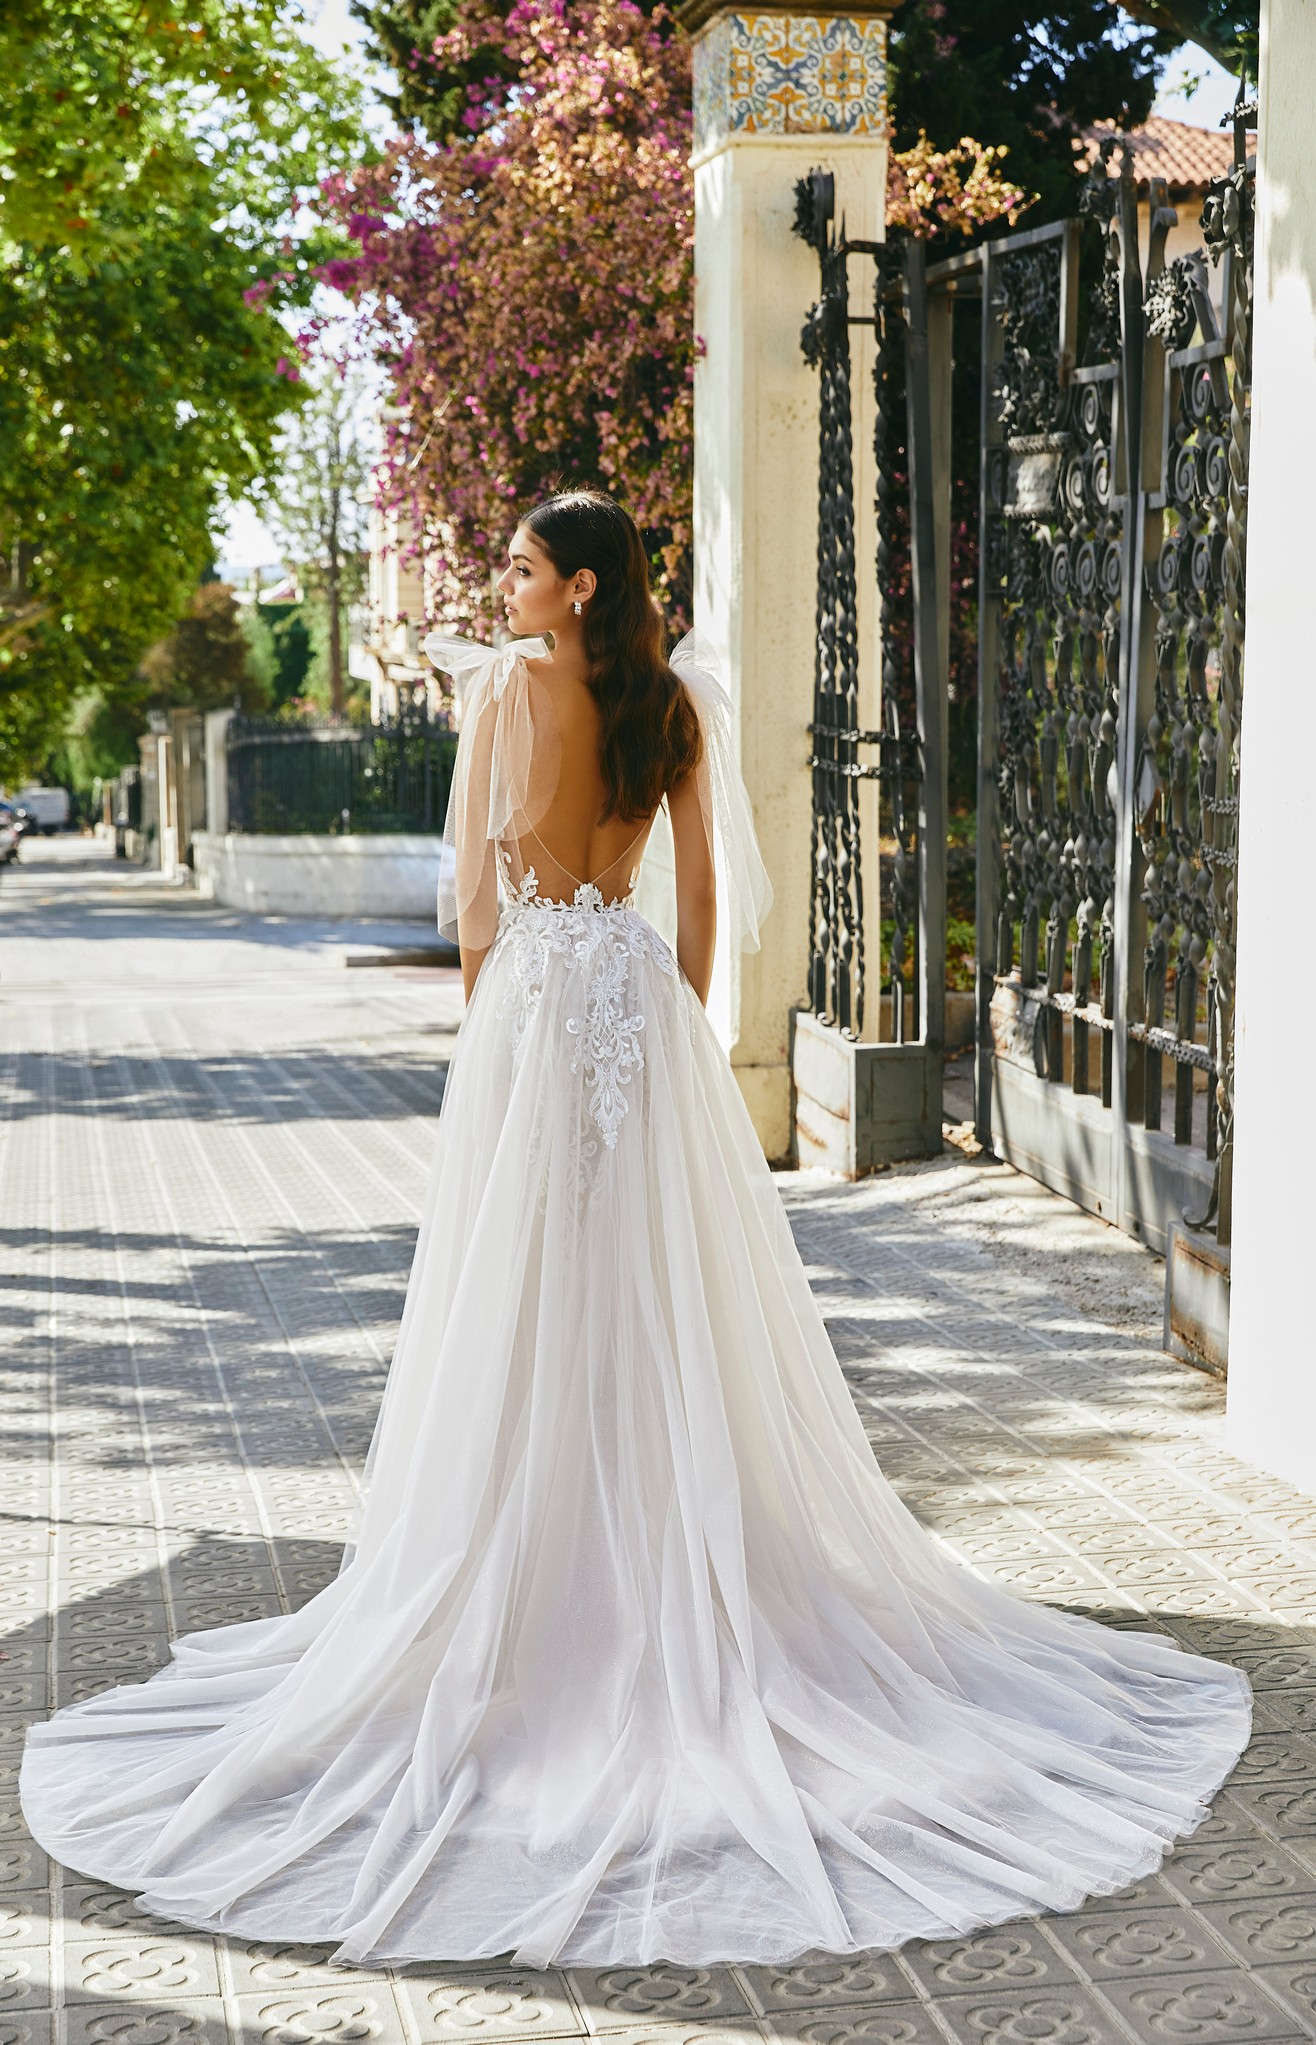 Woman standing on street in Barcelona wearing tulle wedding dress with low illusion back and floral appliques